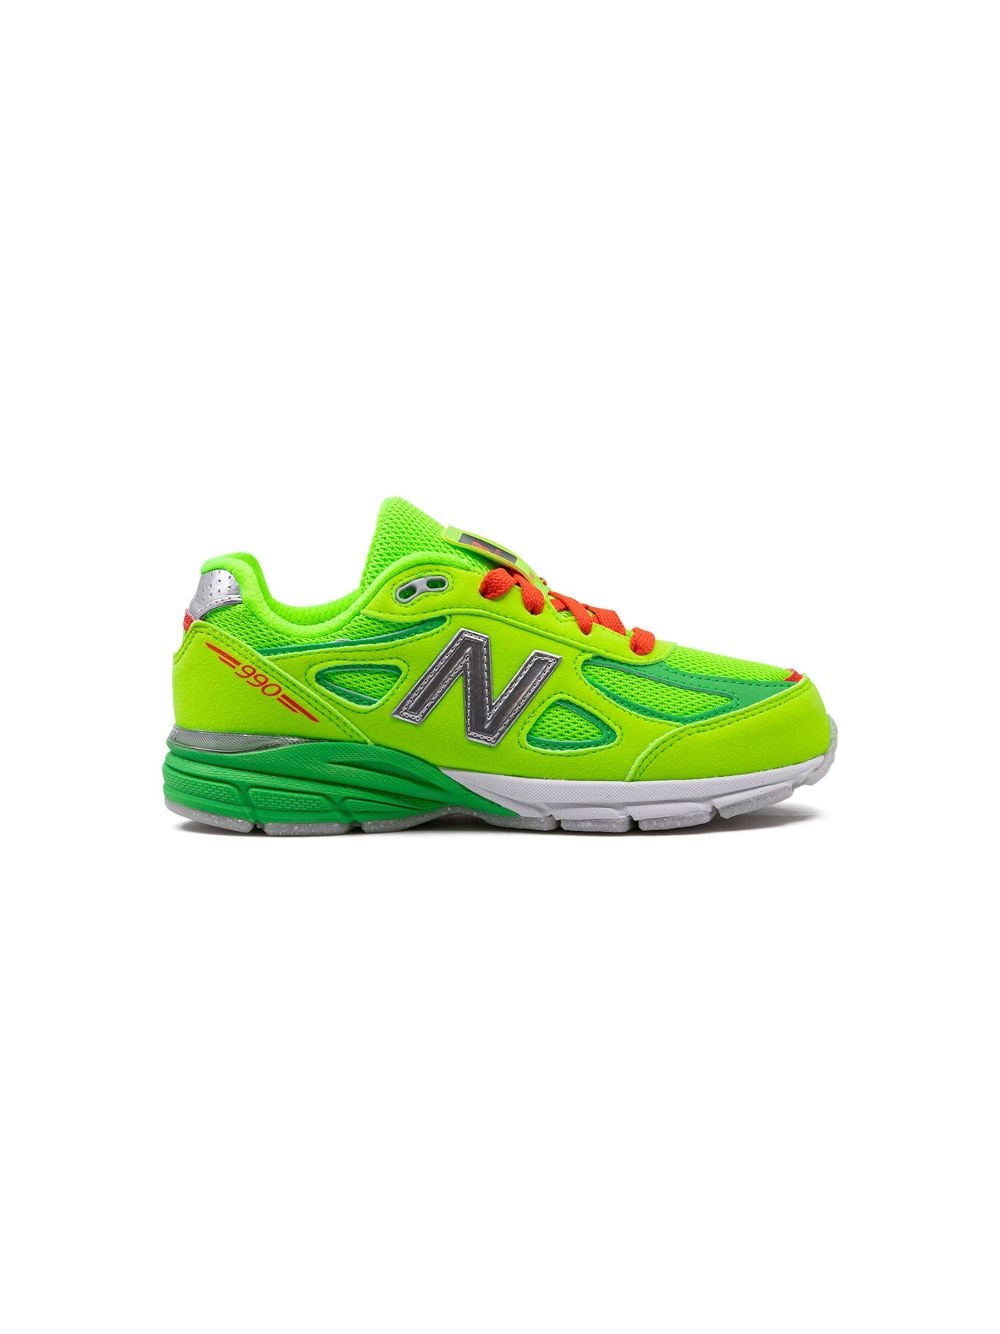 Image 2 of New Balance 990v4 PS "DTLR - Festive" sneakers